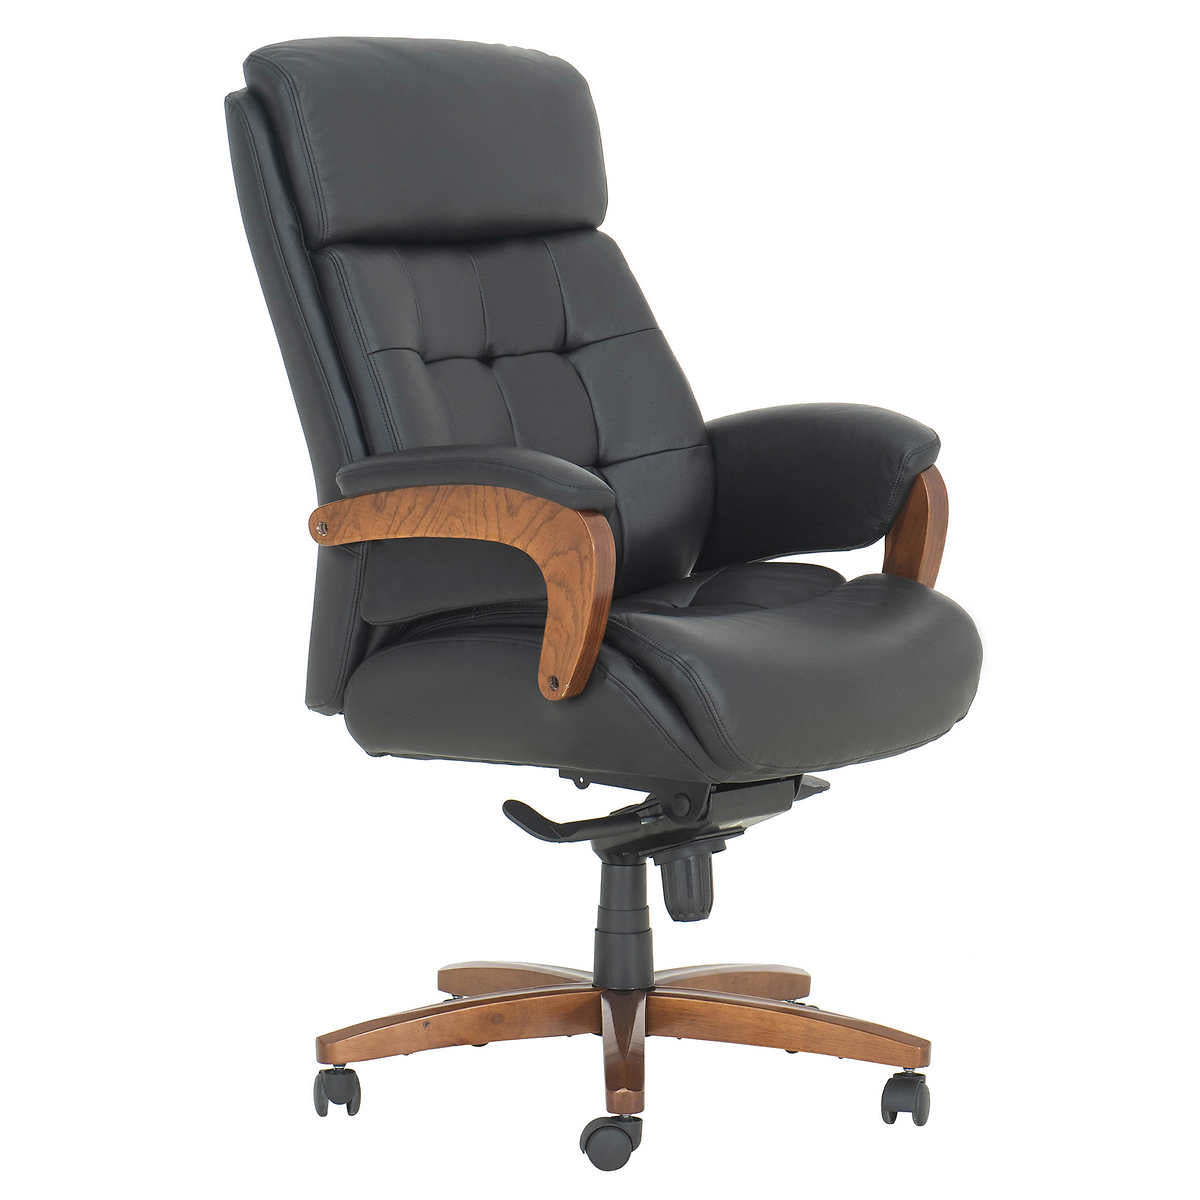 Tuscany Top Grain Leather High Back Executive Office Chair